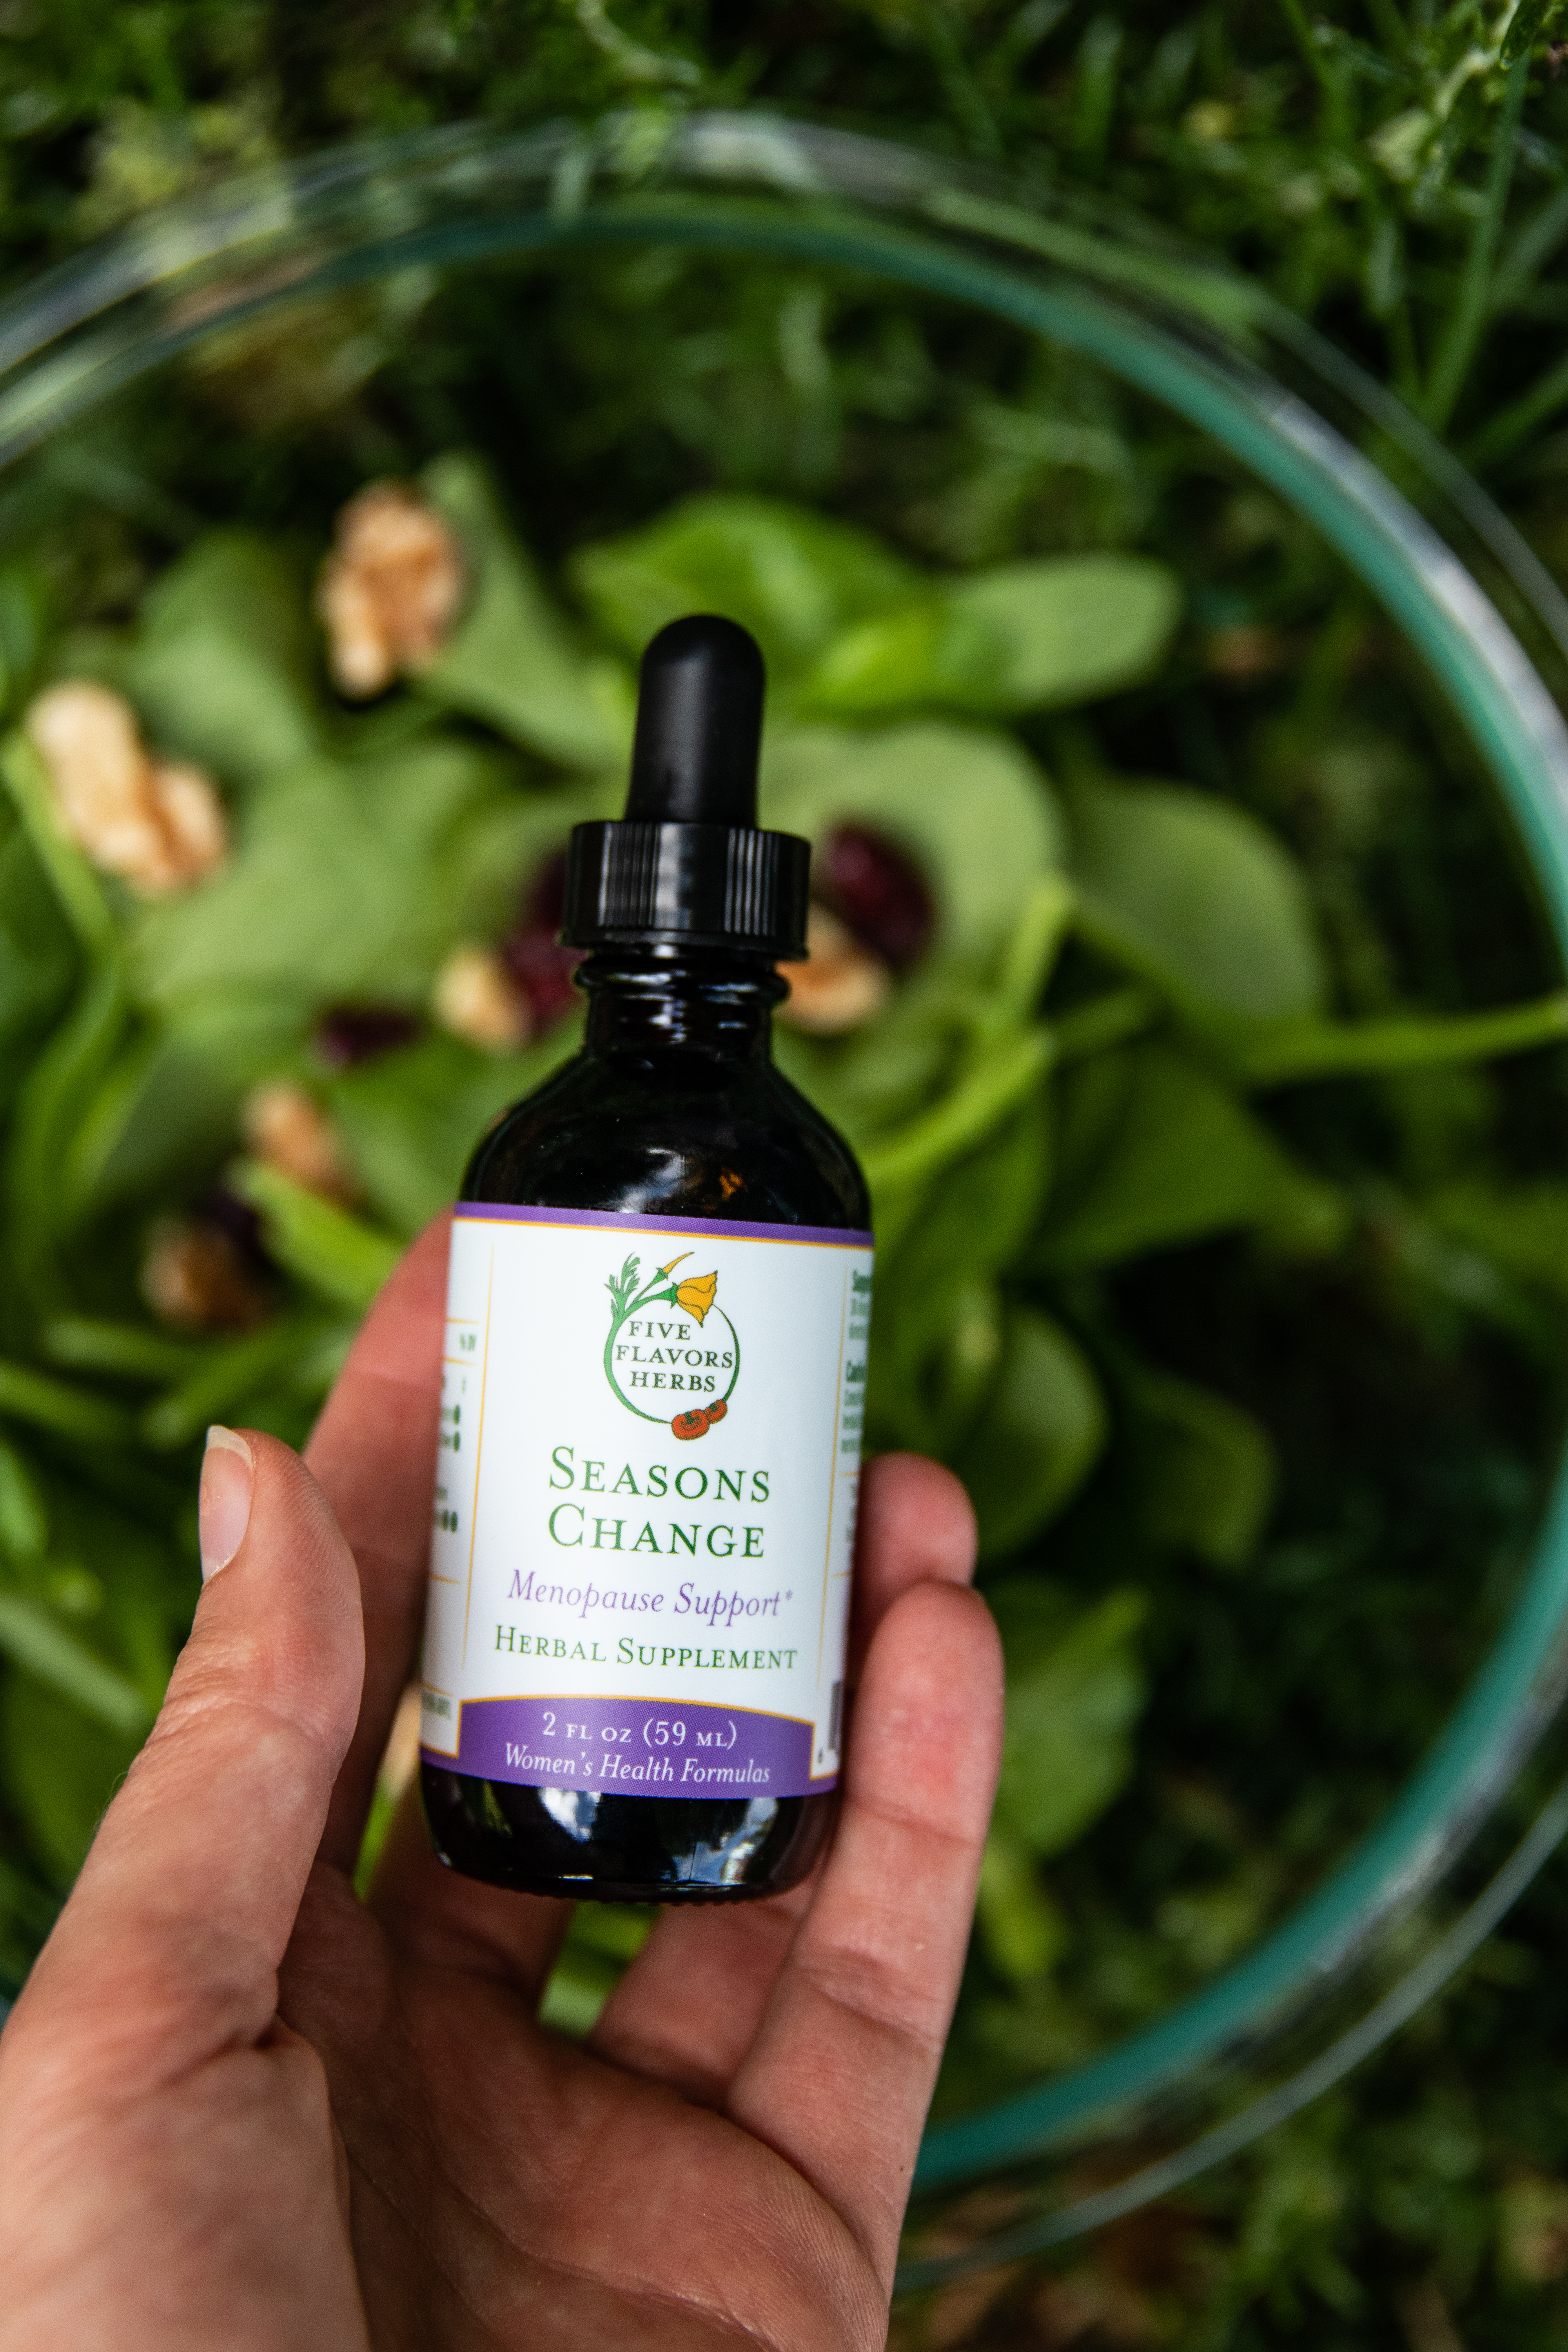 hand-holding-bottle-of-seasons-change-menopause-support-tincture-above-bowl-of-leafy-spinach-greens